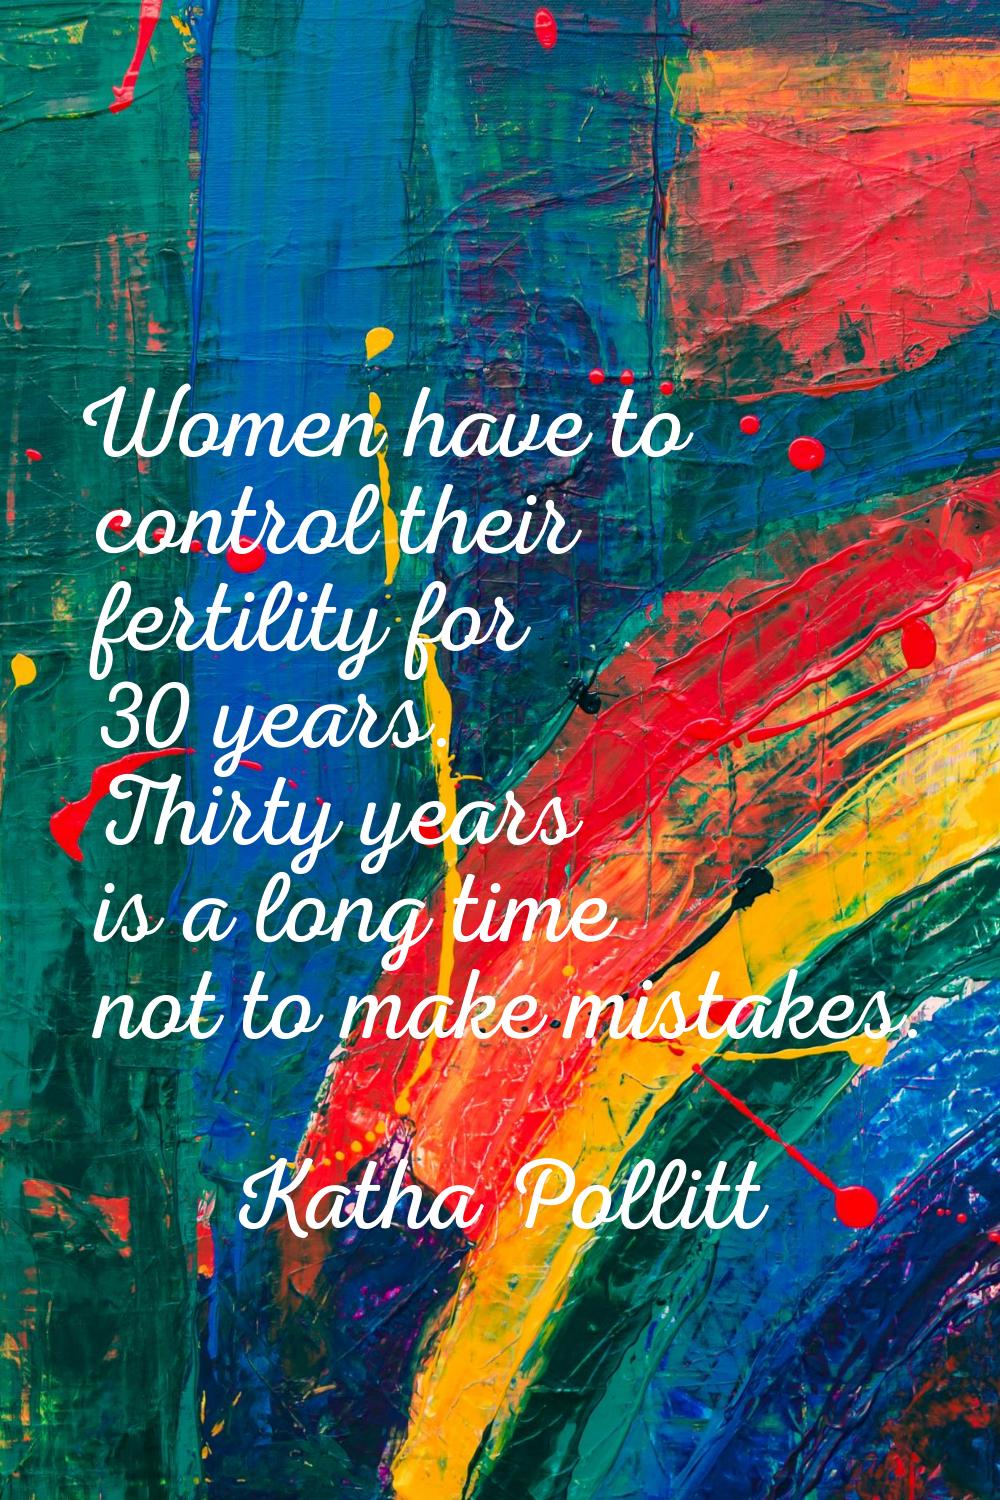 Women have to control their fertility for 30 years. Thirty years is a long time not to make mistake